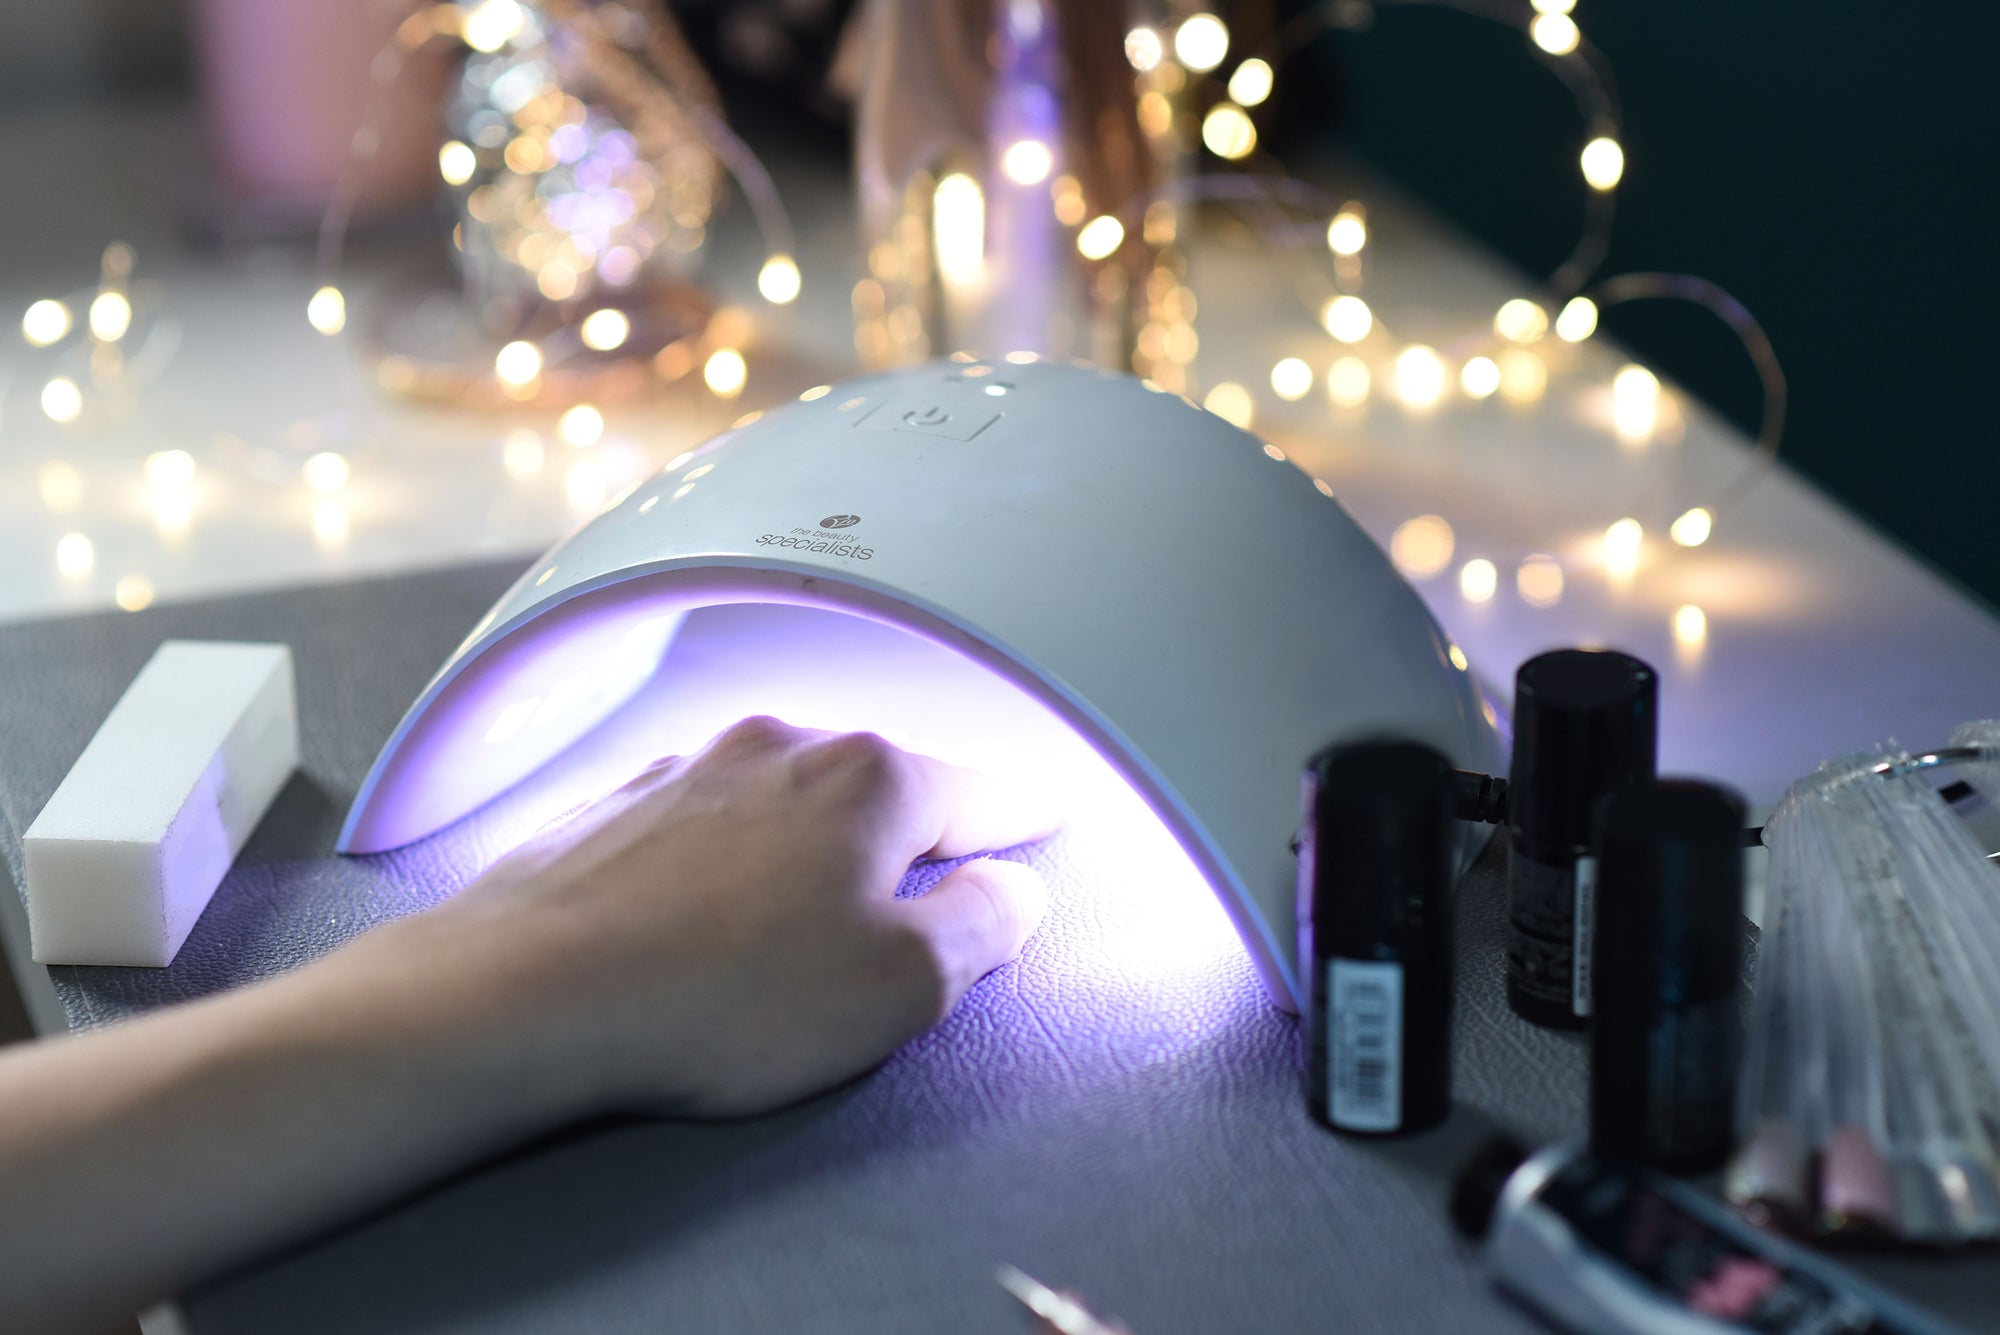 Amazon.com: Wisdompark UV LED Nail Lamp, Professional Light for Nails 36W  with 3 Timers Lamp Gel Polish Curing Dryer Portable Manicure Art Tools Auto  Sensor, LCD Display : Beauty & Personal Care